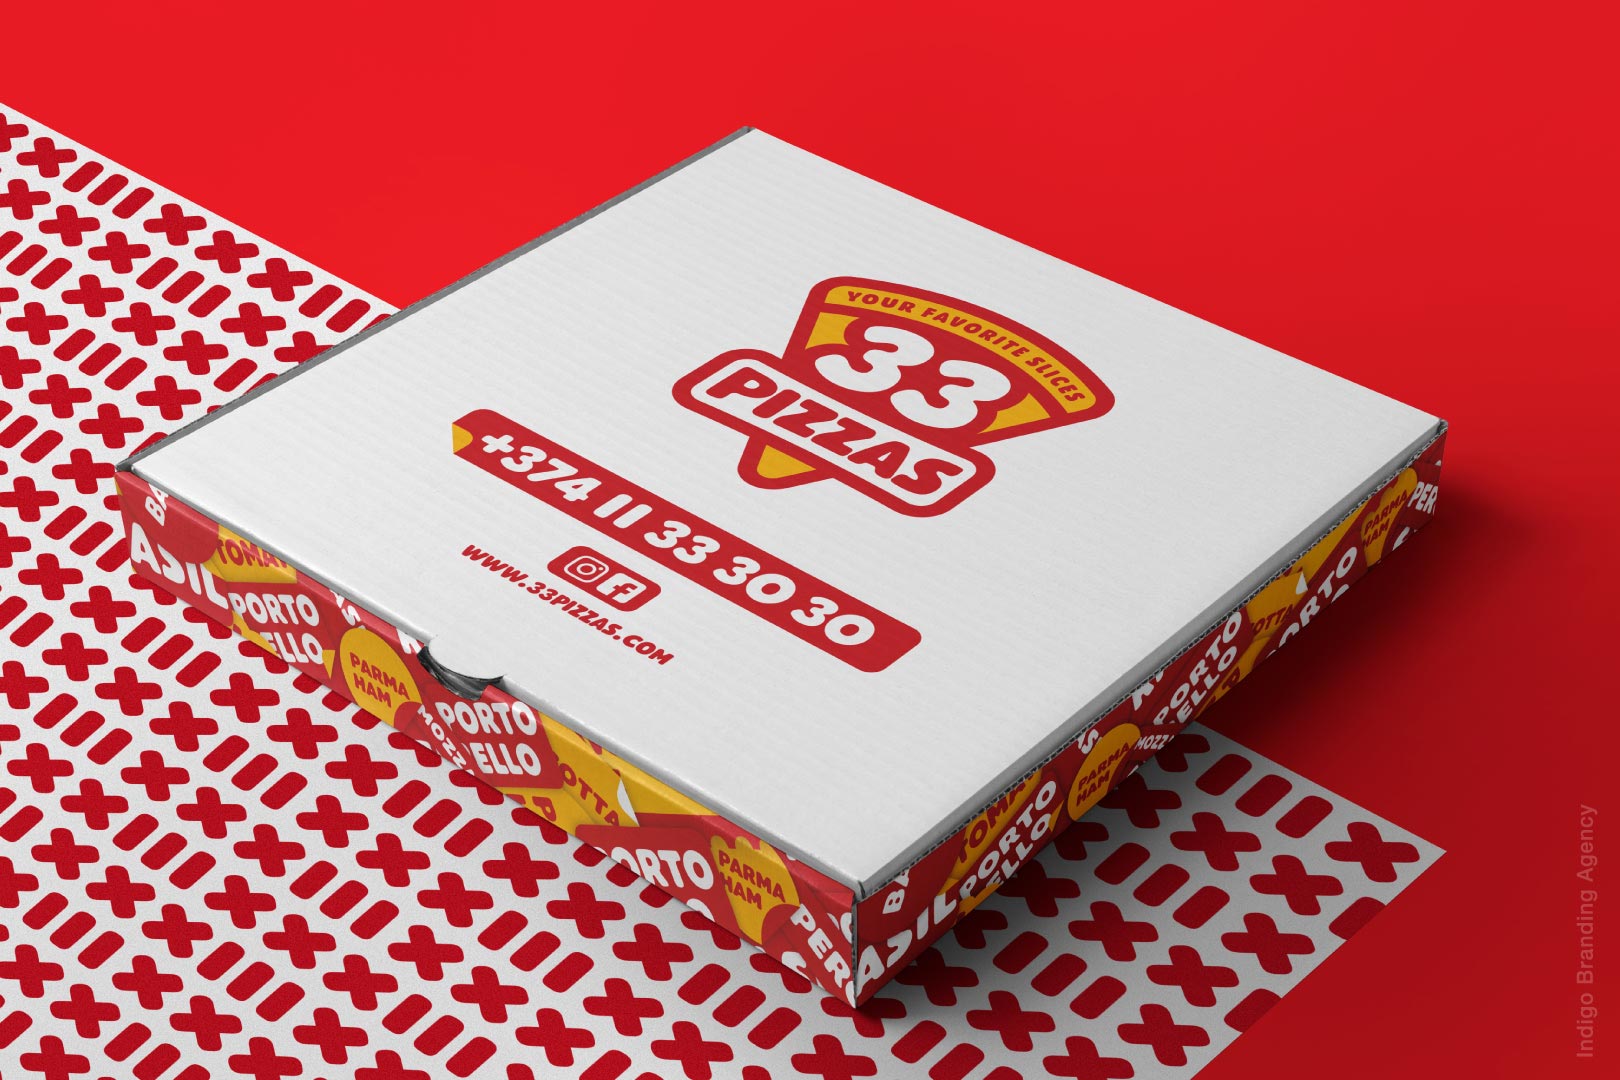 33 pizzas packaging for order delivery branded by indigo Branding